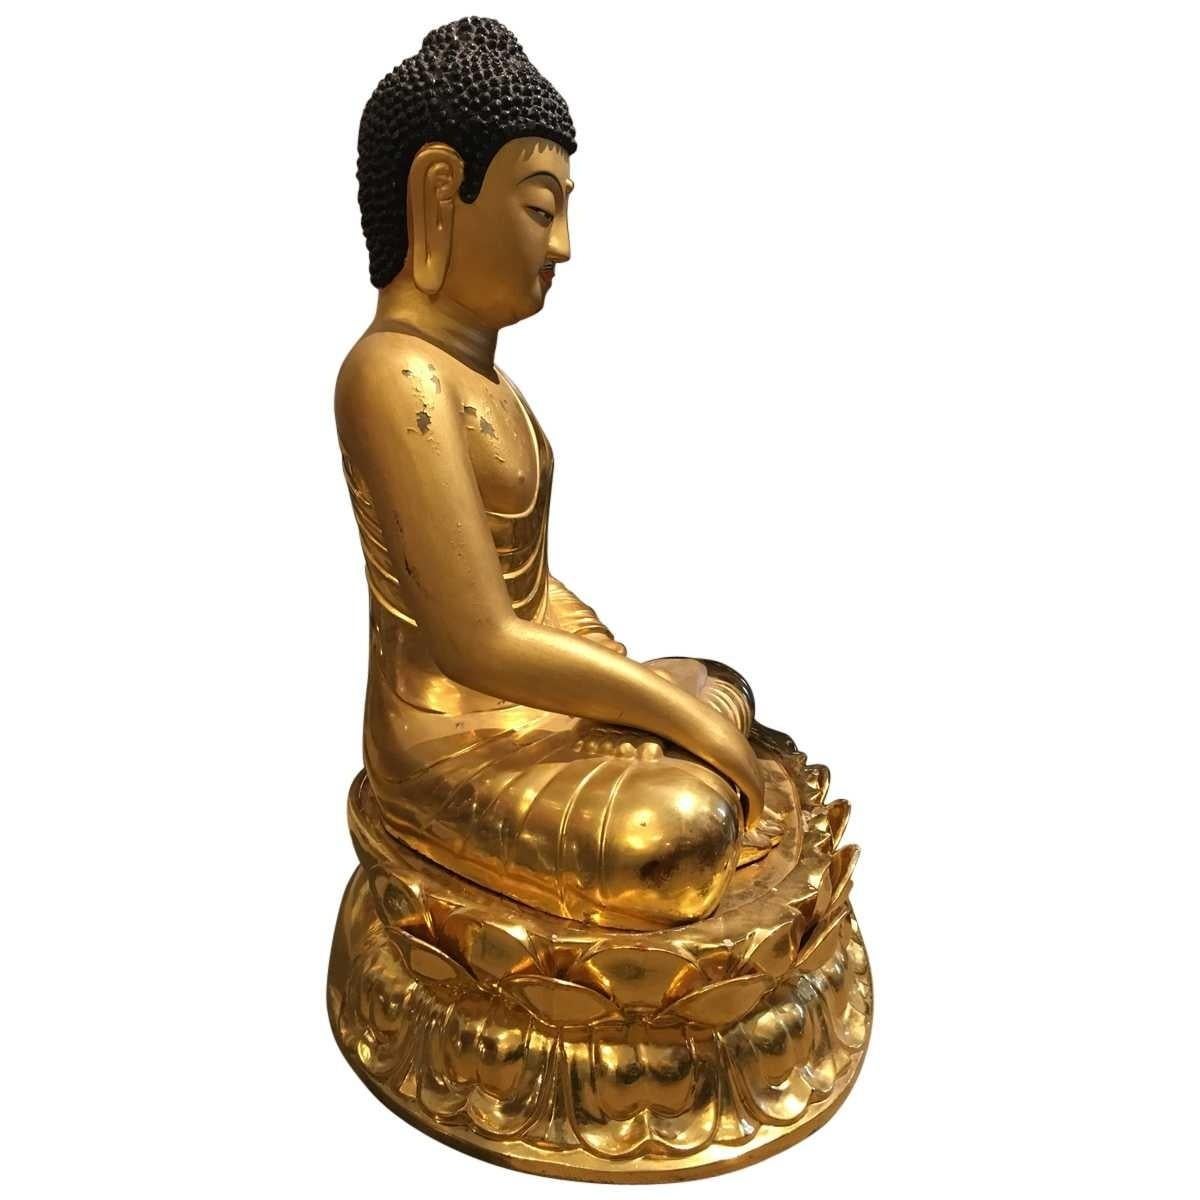 Buddha, gilded base. One of the world's oldest traditions, Chinese art spans thousands of years and numerous eras. Traditionally, Chinese art and decor is defined by a decorative, yet seemingly understated quality done using earth tones and a linear